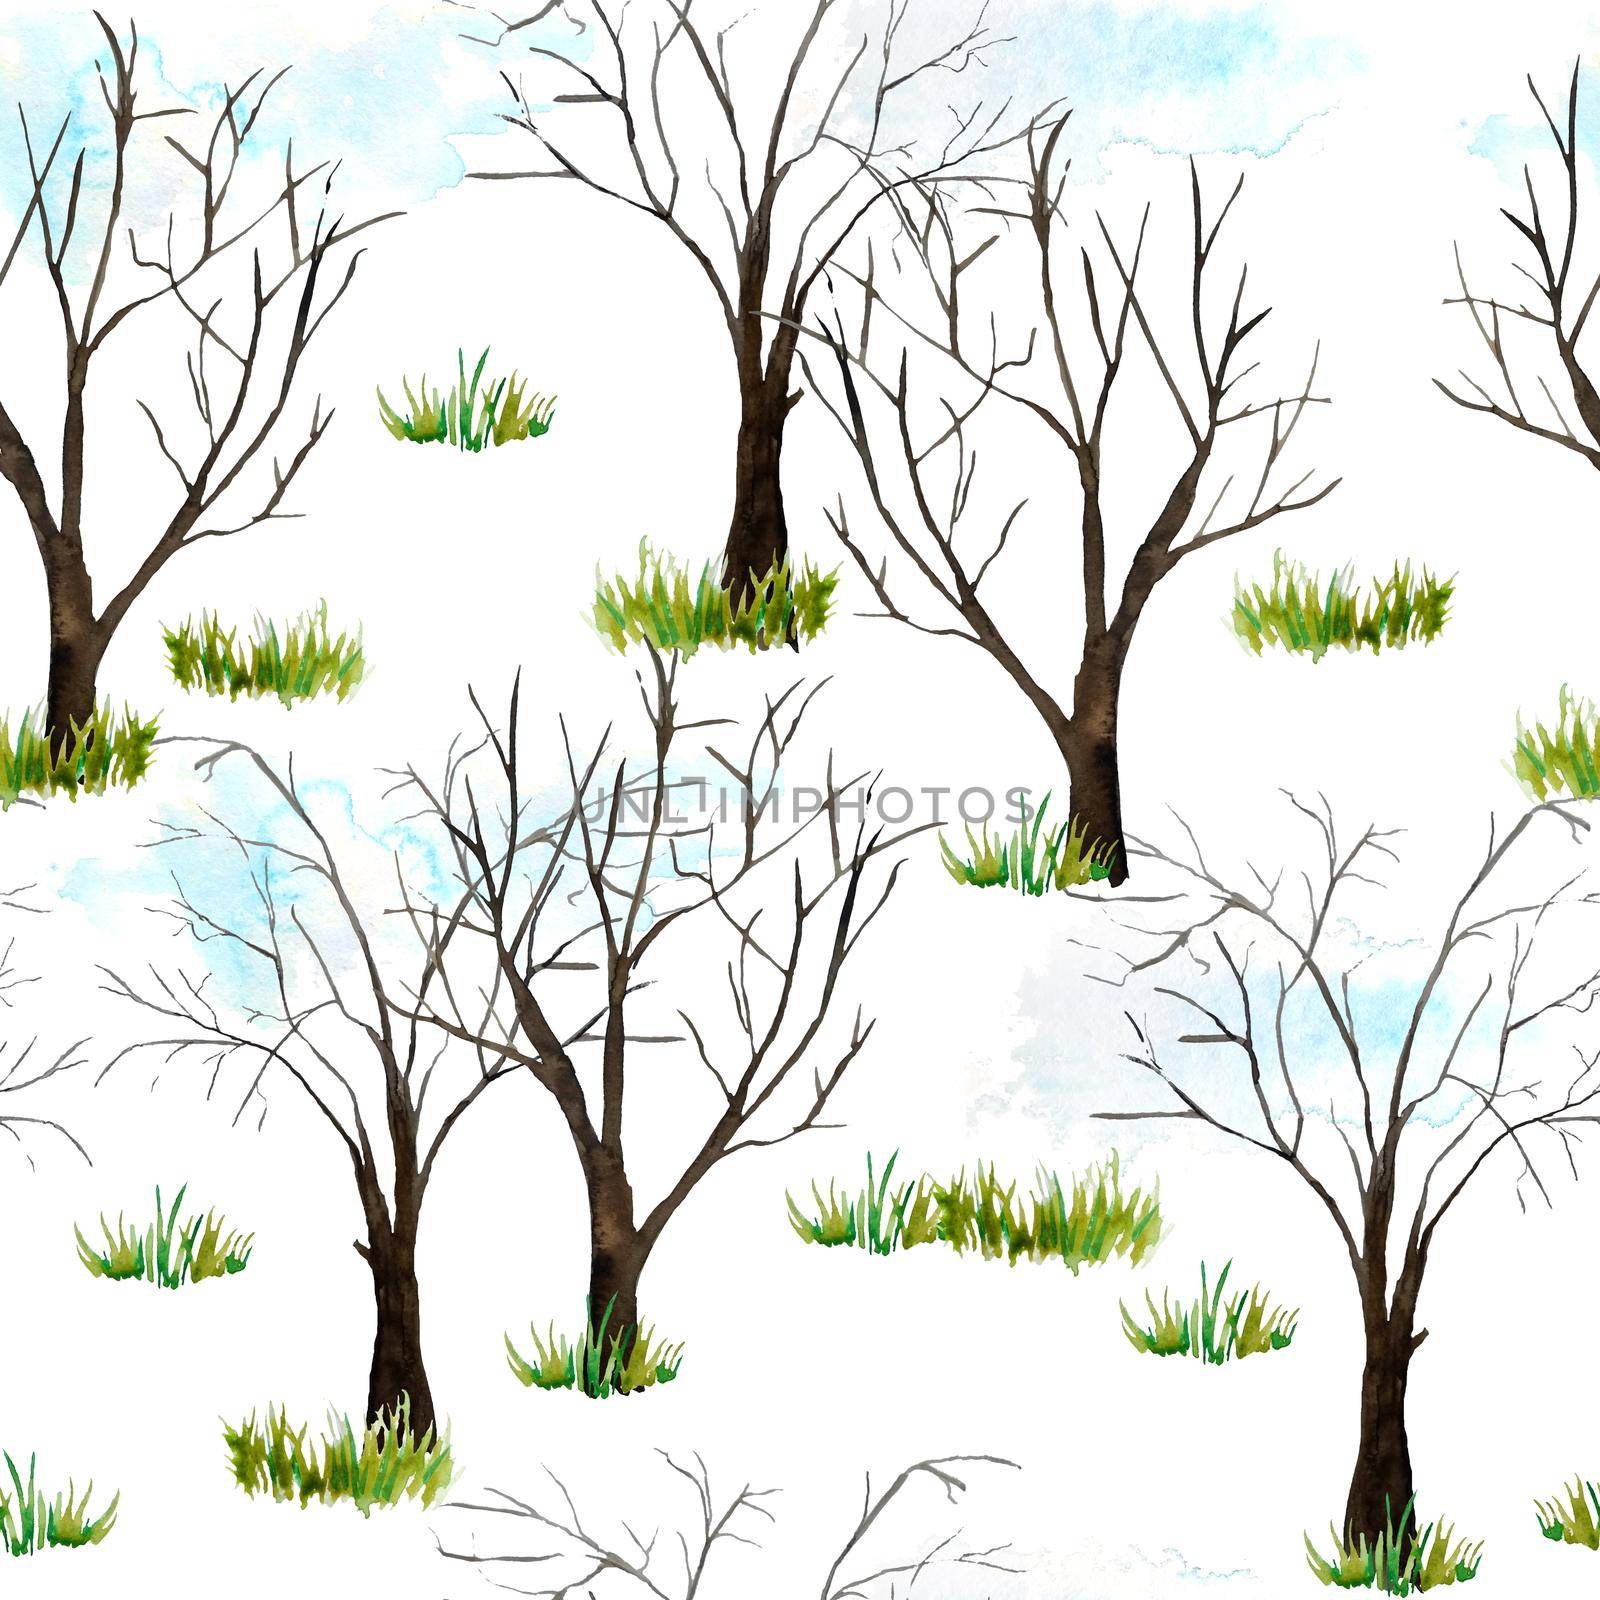 Seamless watercolor hand drawn pattern with spring forest. Green summer trees, grass, flowers, first leaves in outdoor woodland journey adventure for nature lovers natural landscape in cartoon style textile wallpaper by Lagmar